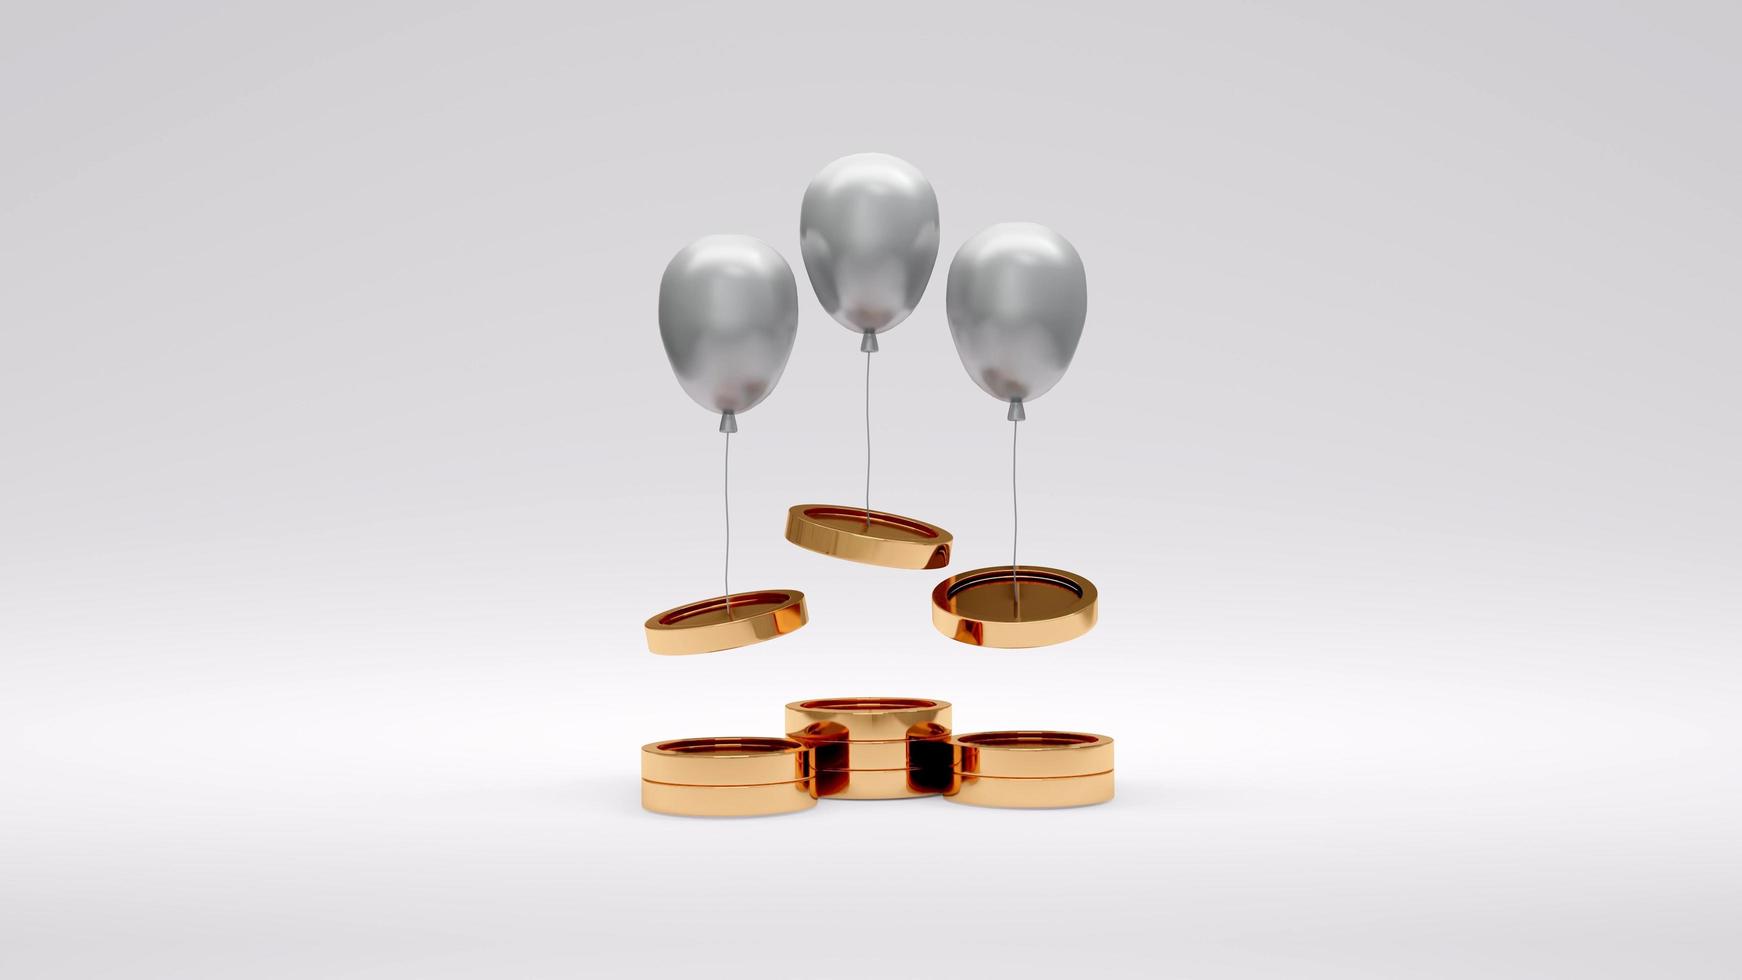 3D Rendering concept of money inflation concept, money spending. Coins are raised up by balloons isolated on background. 3D Render. 3D illustration. photo